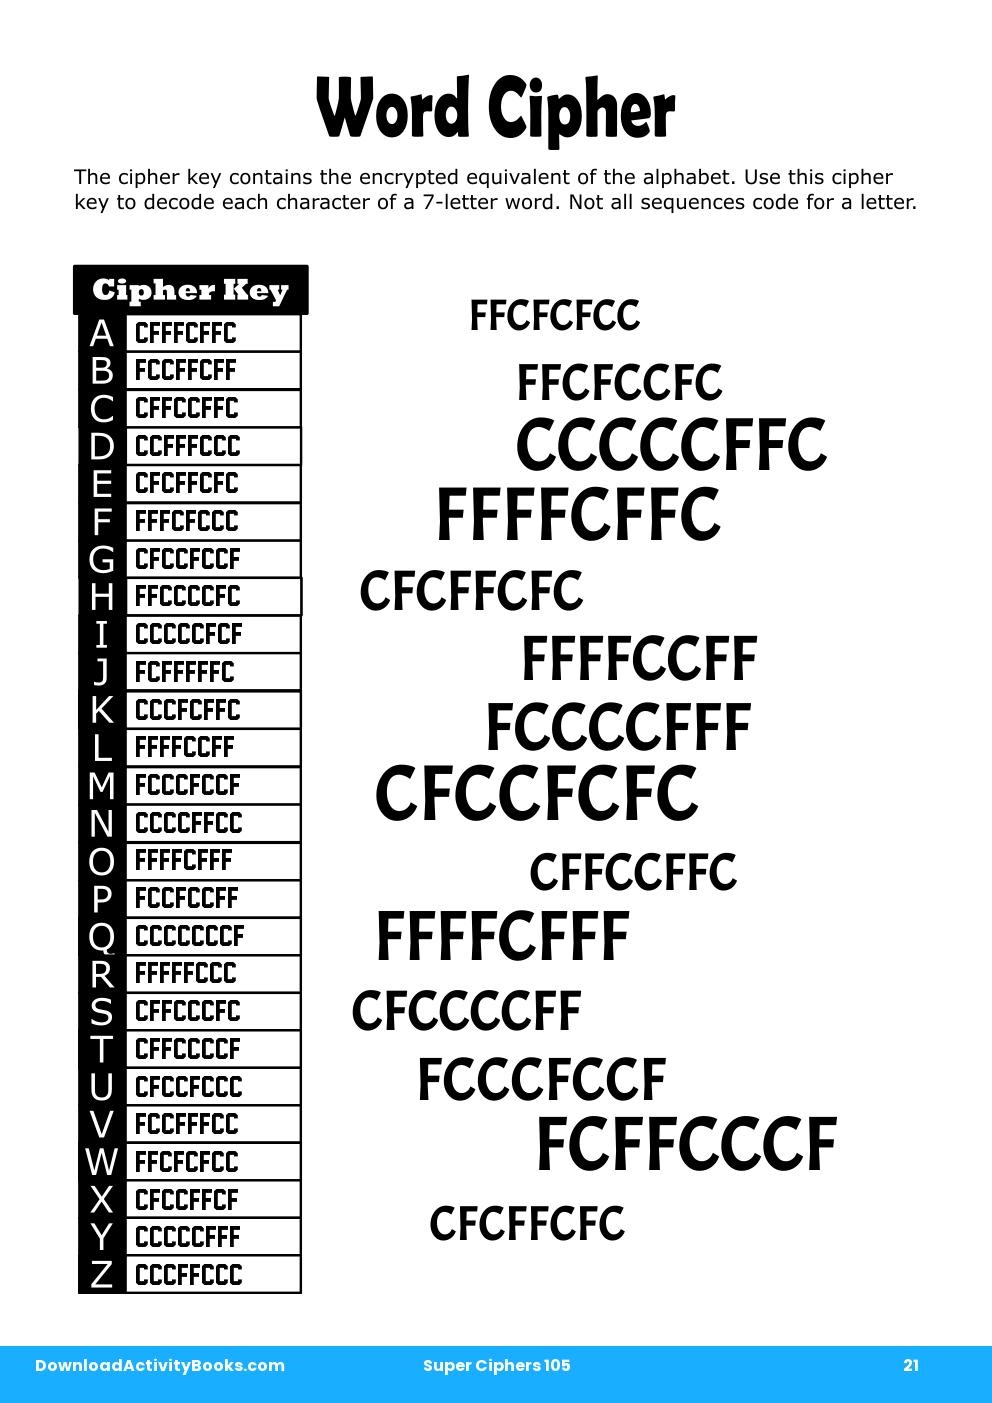 Word Cipher in Super Ciphers 105